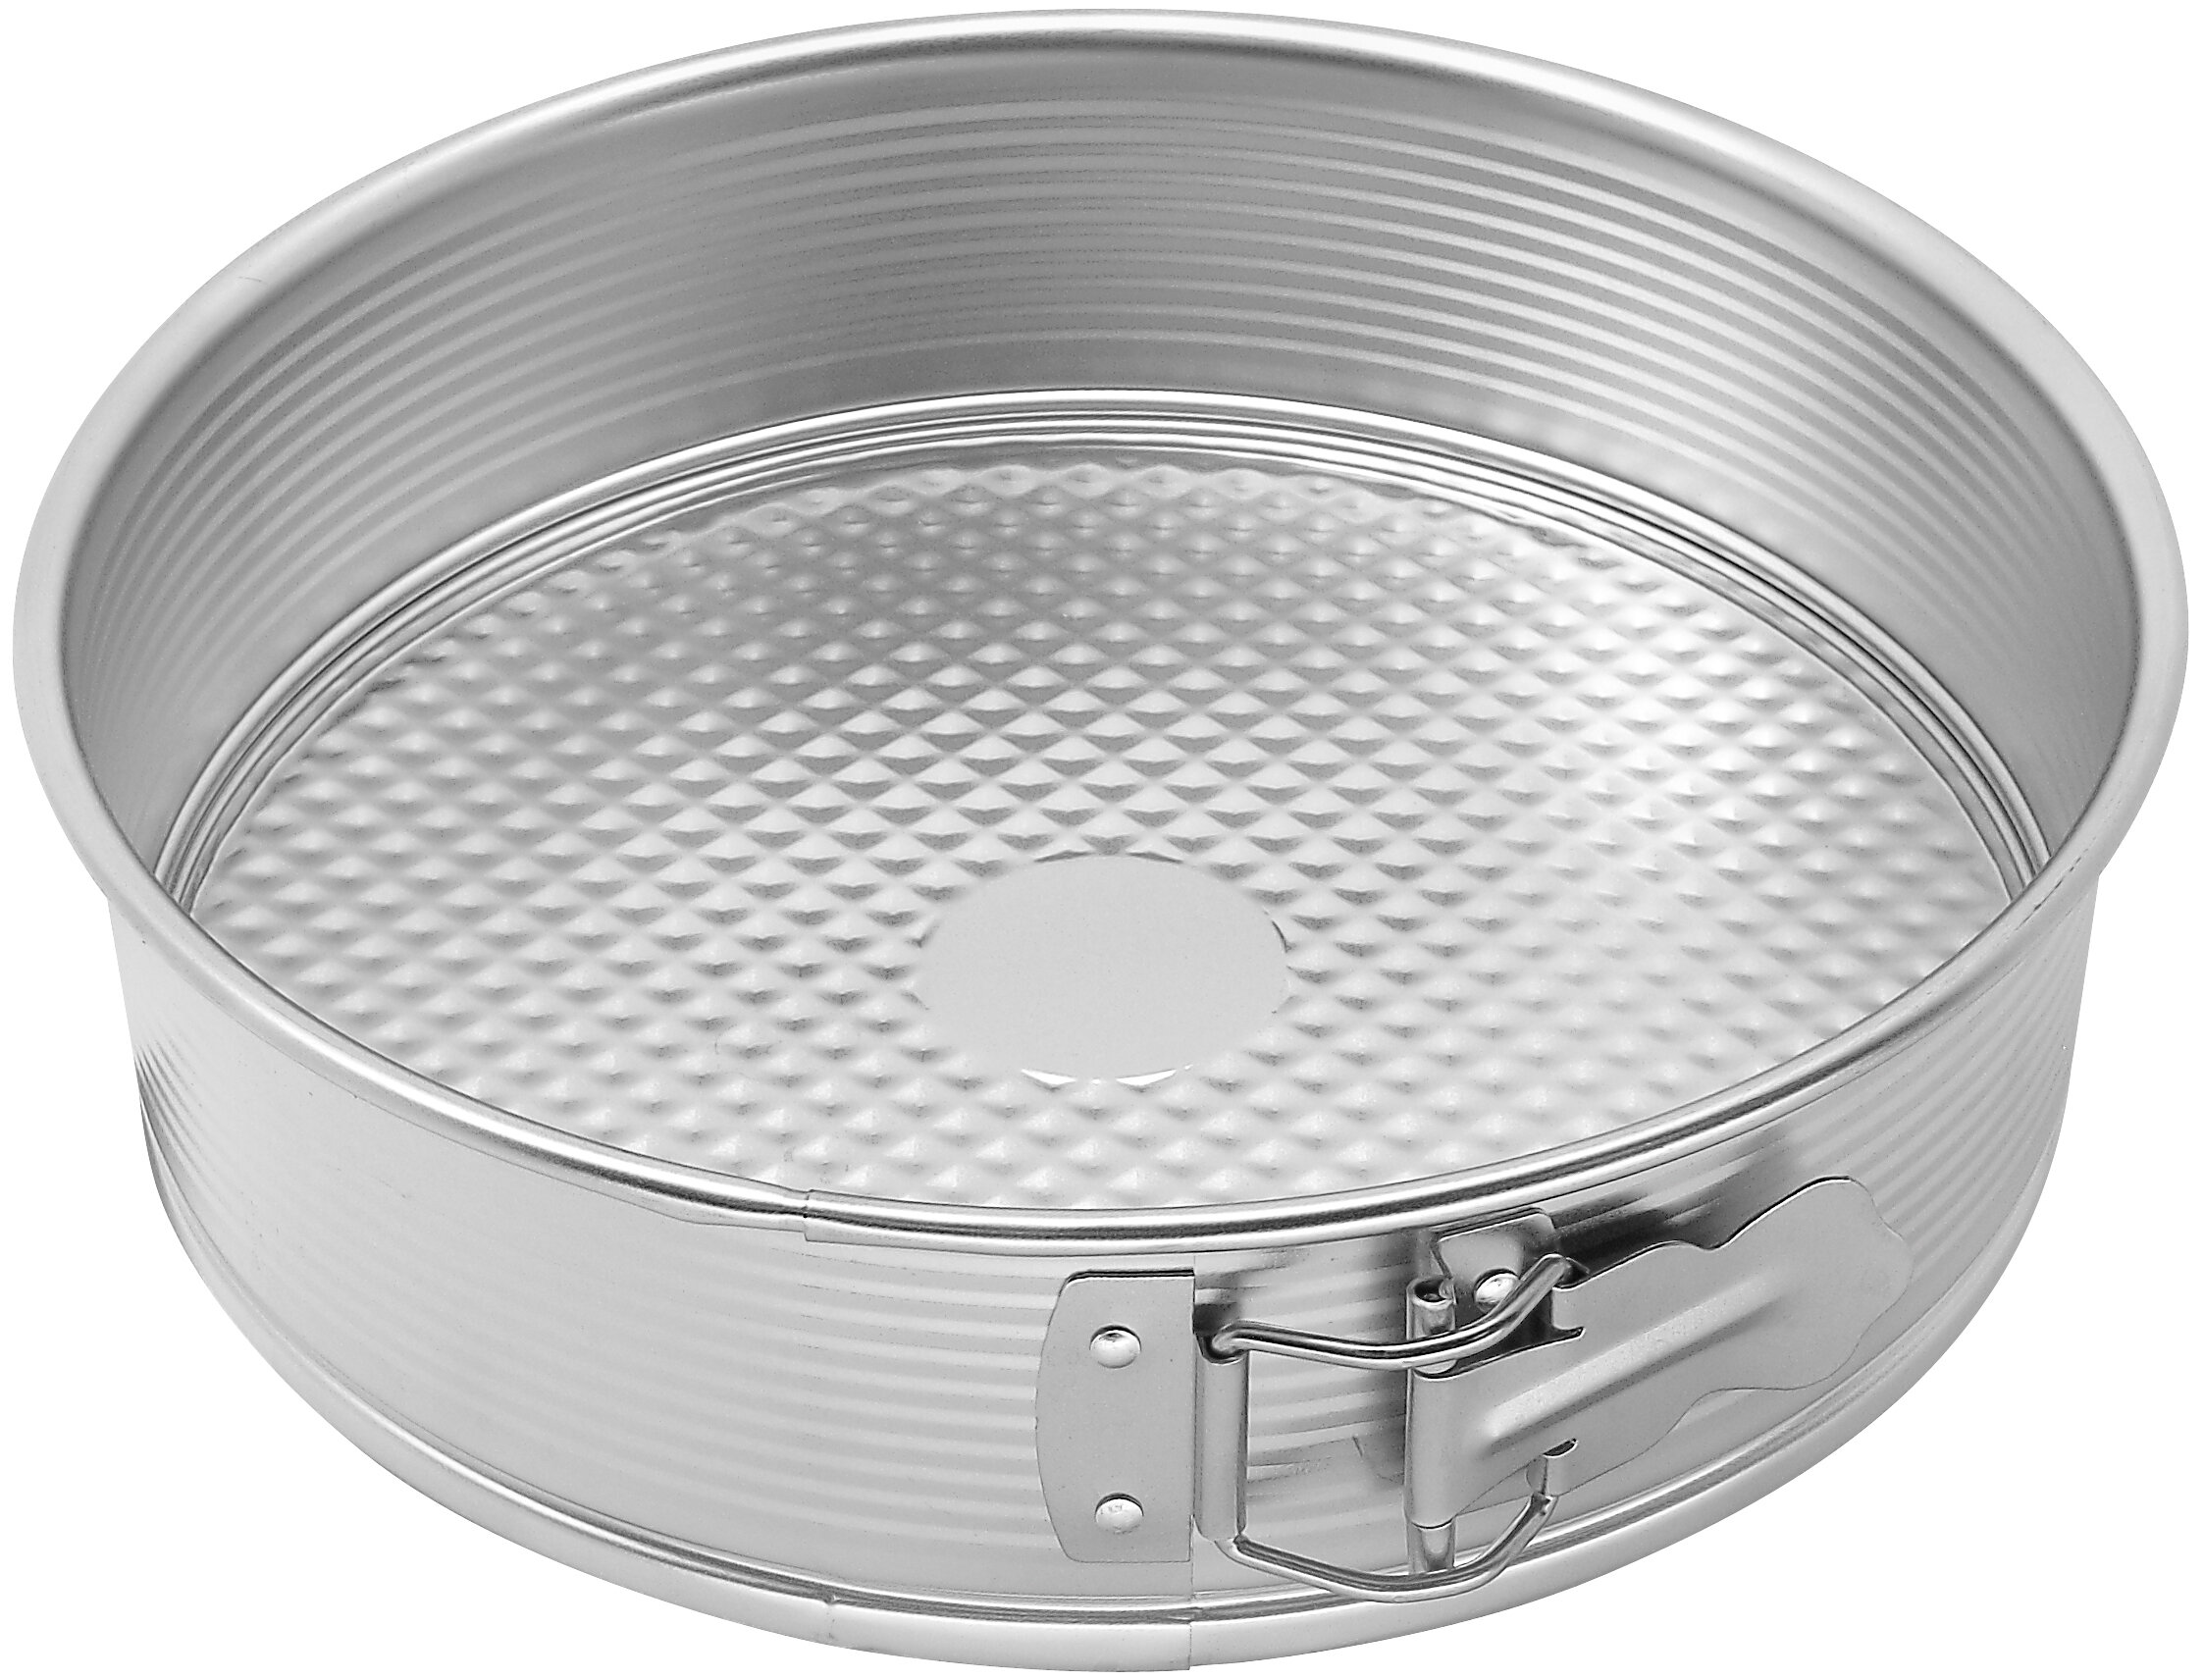 1 Piece, Springform Cake Pan, Removable Loose Bottom Baking Cake Mold,  Round Baking Pan, Oven Accessories, Baking Tools, Kitchen Gadgets, Kitchen  Accessories